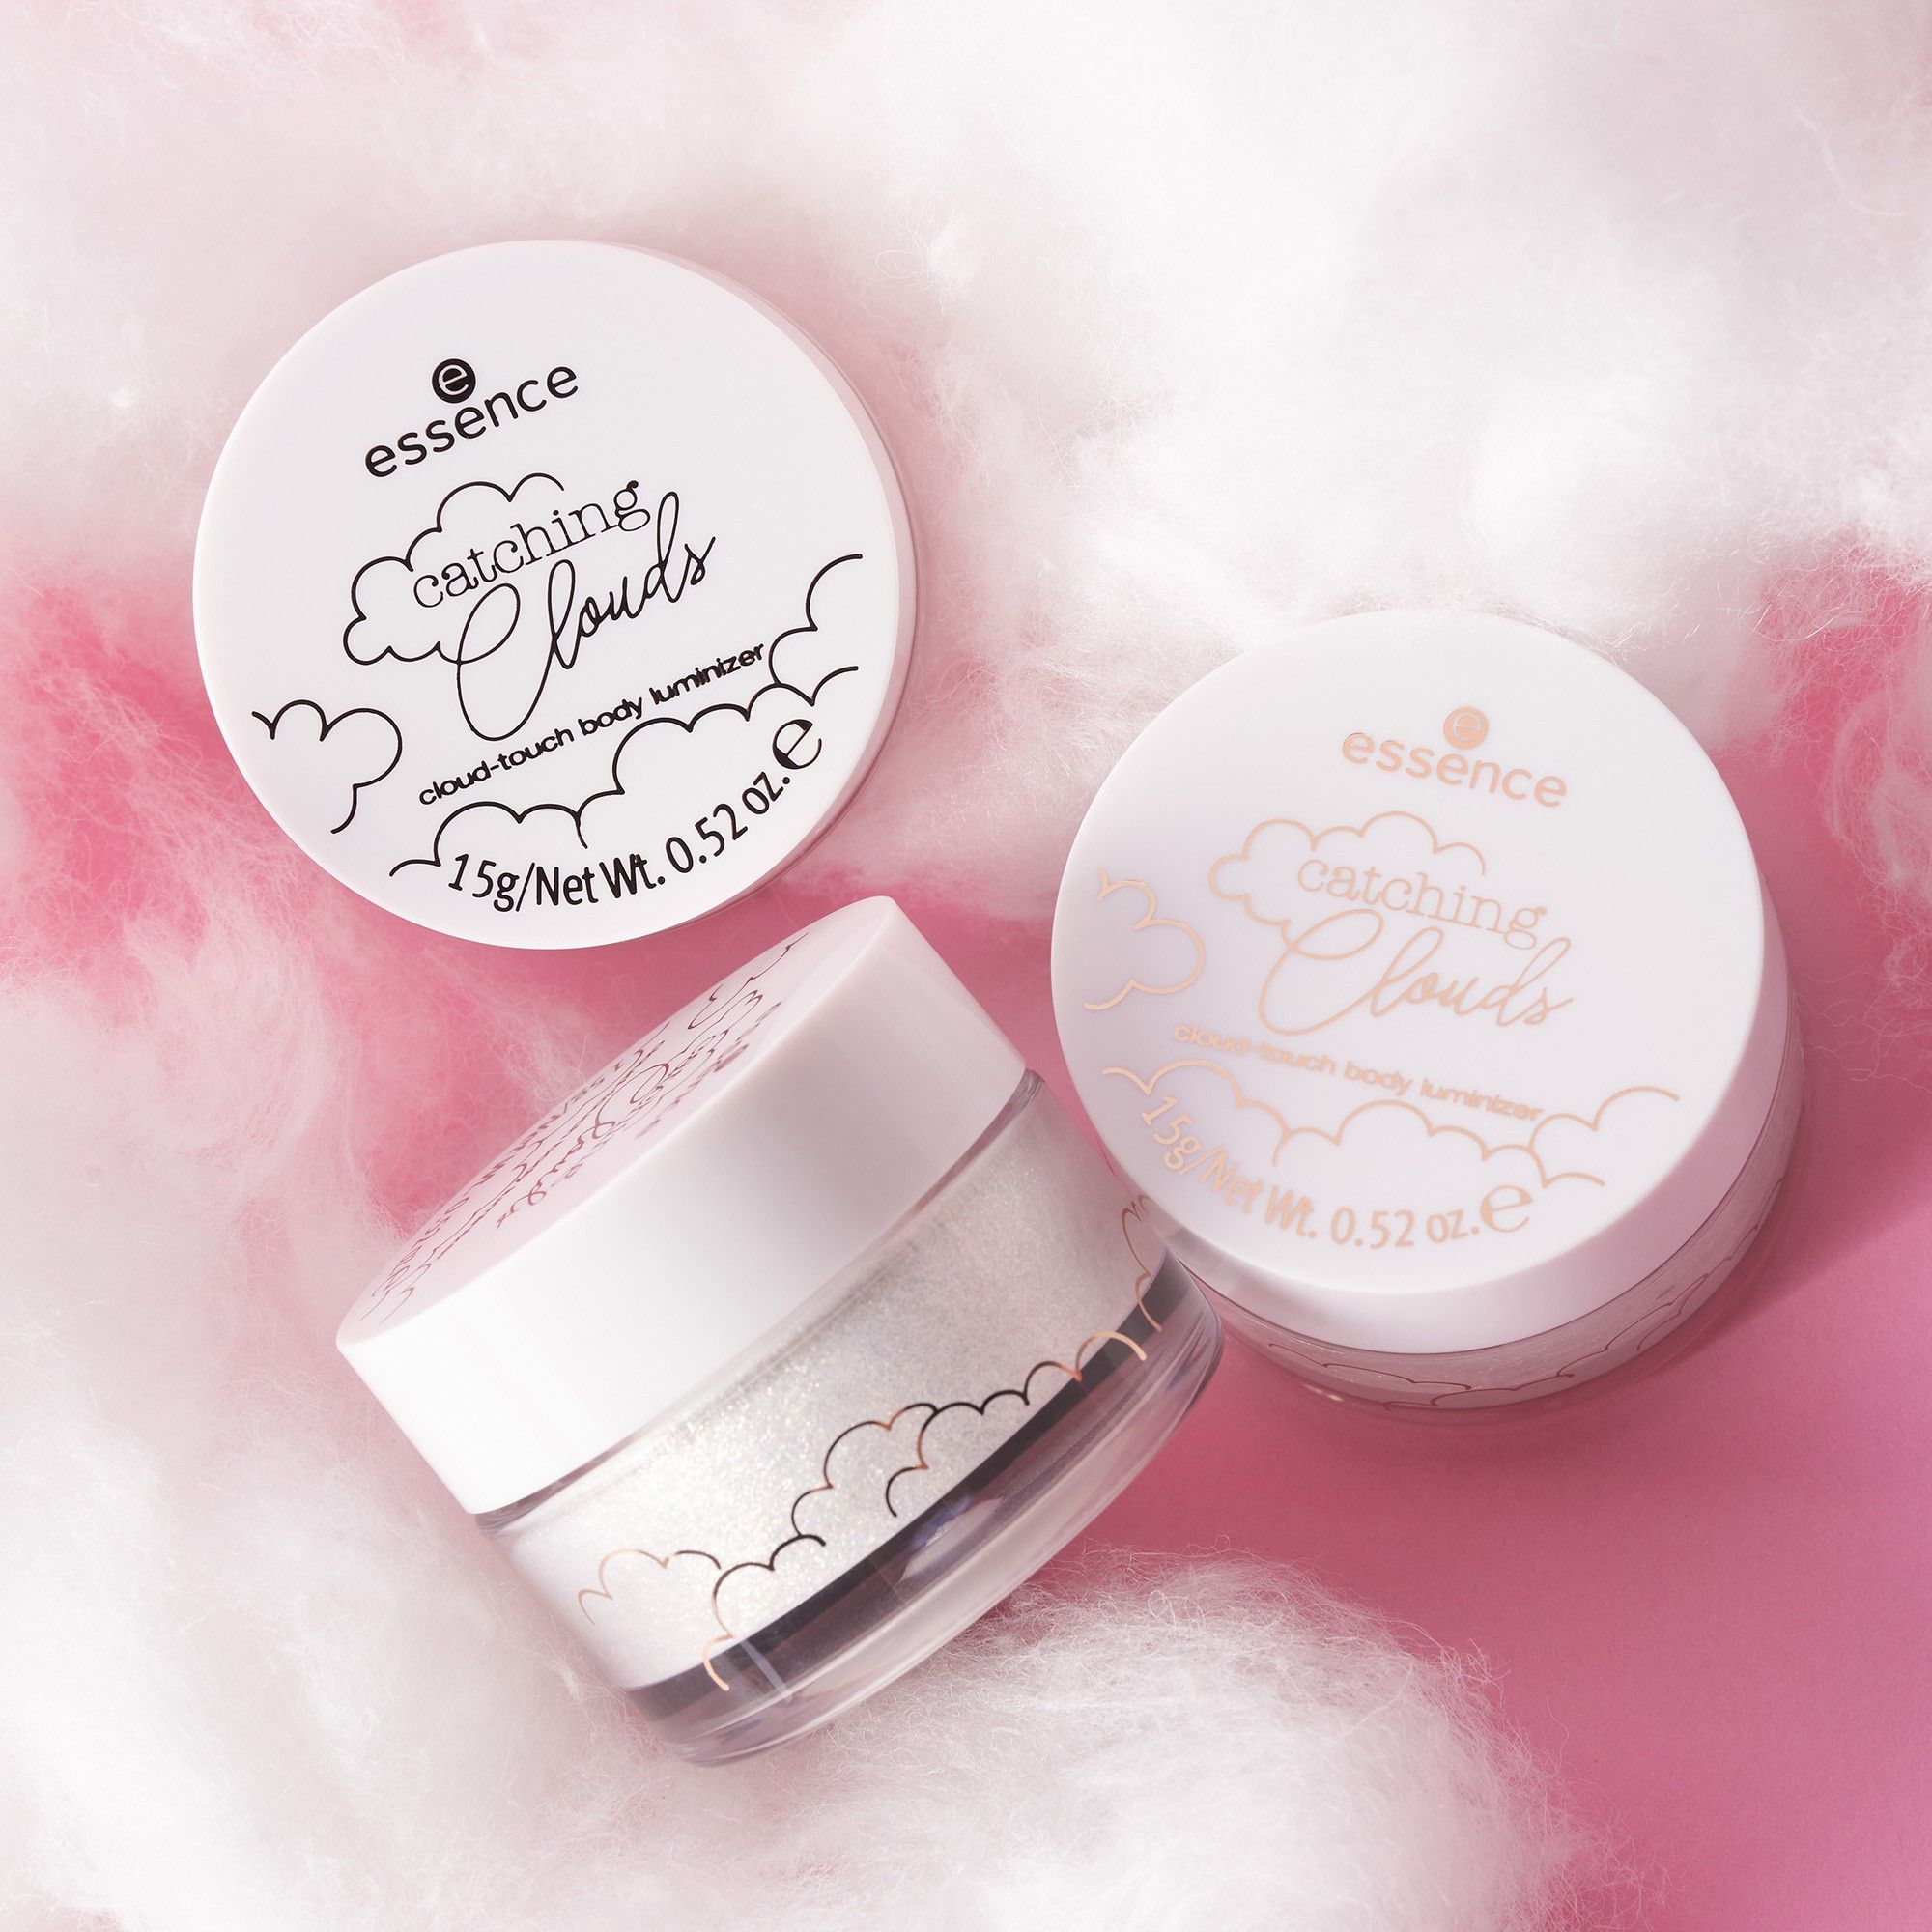 Catching Clouds - Cloud-Touch Body Luminizer